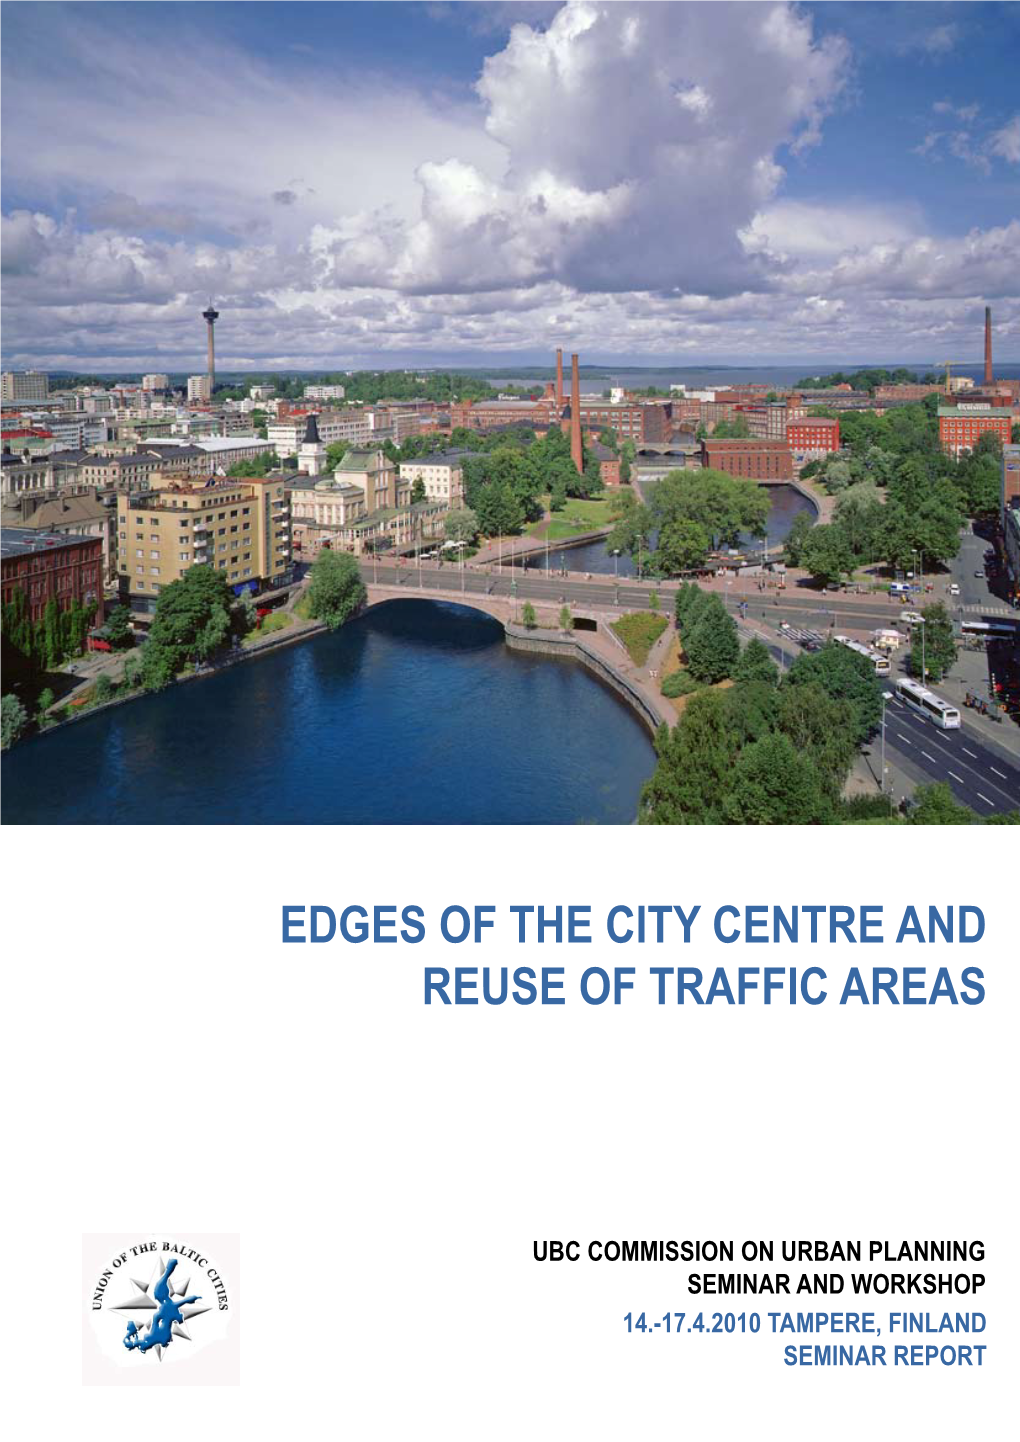 Edges of the City Centre and Reuse of Traffic Areas